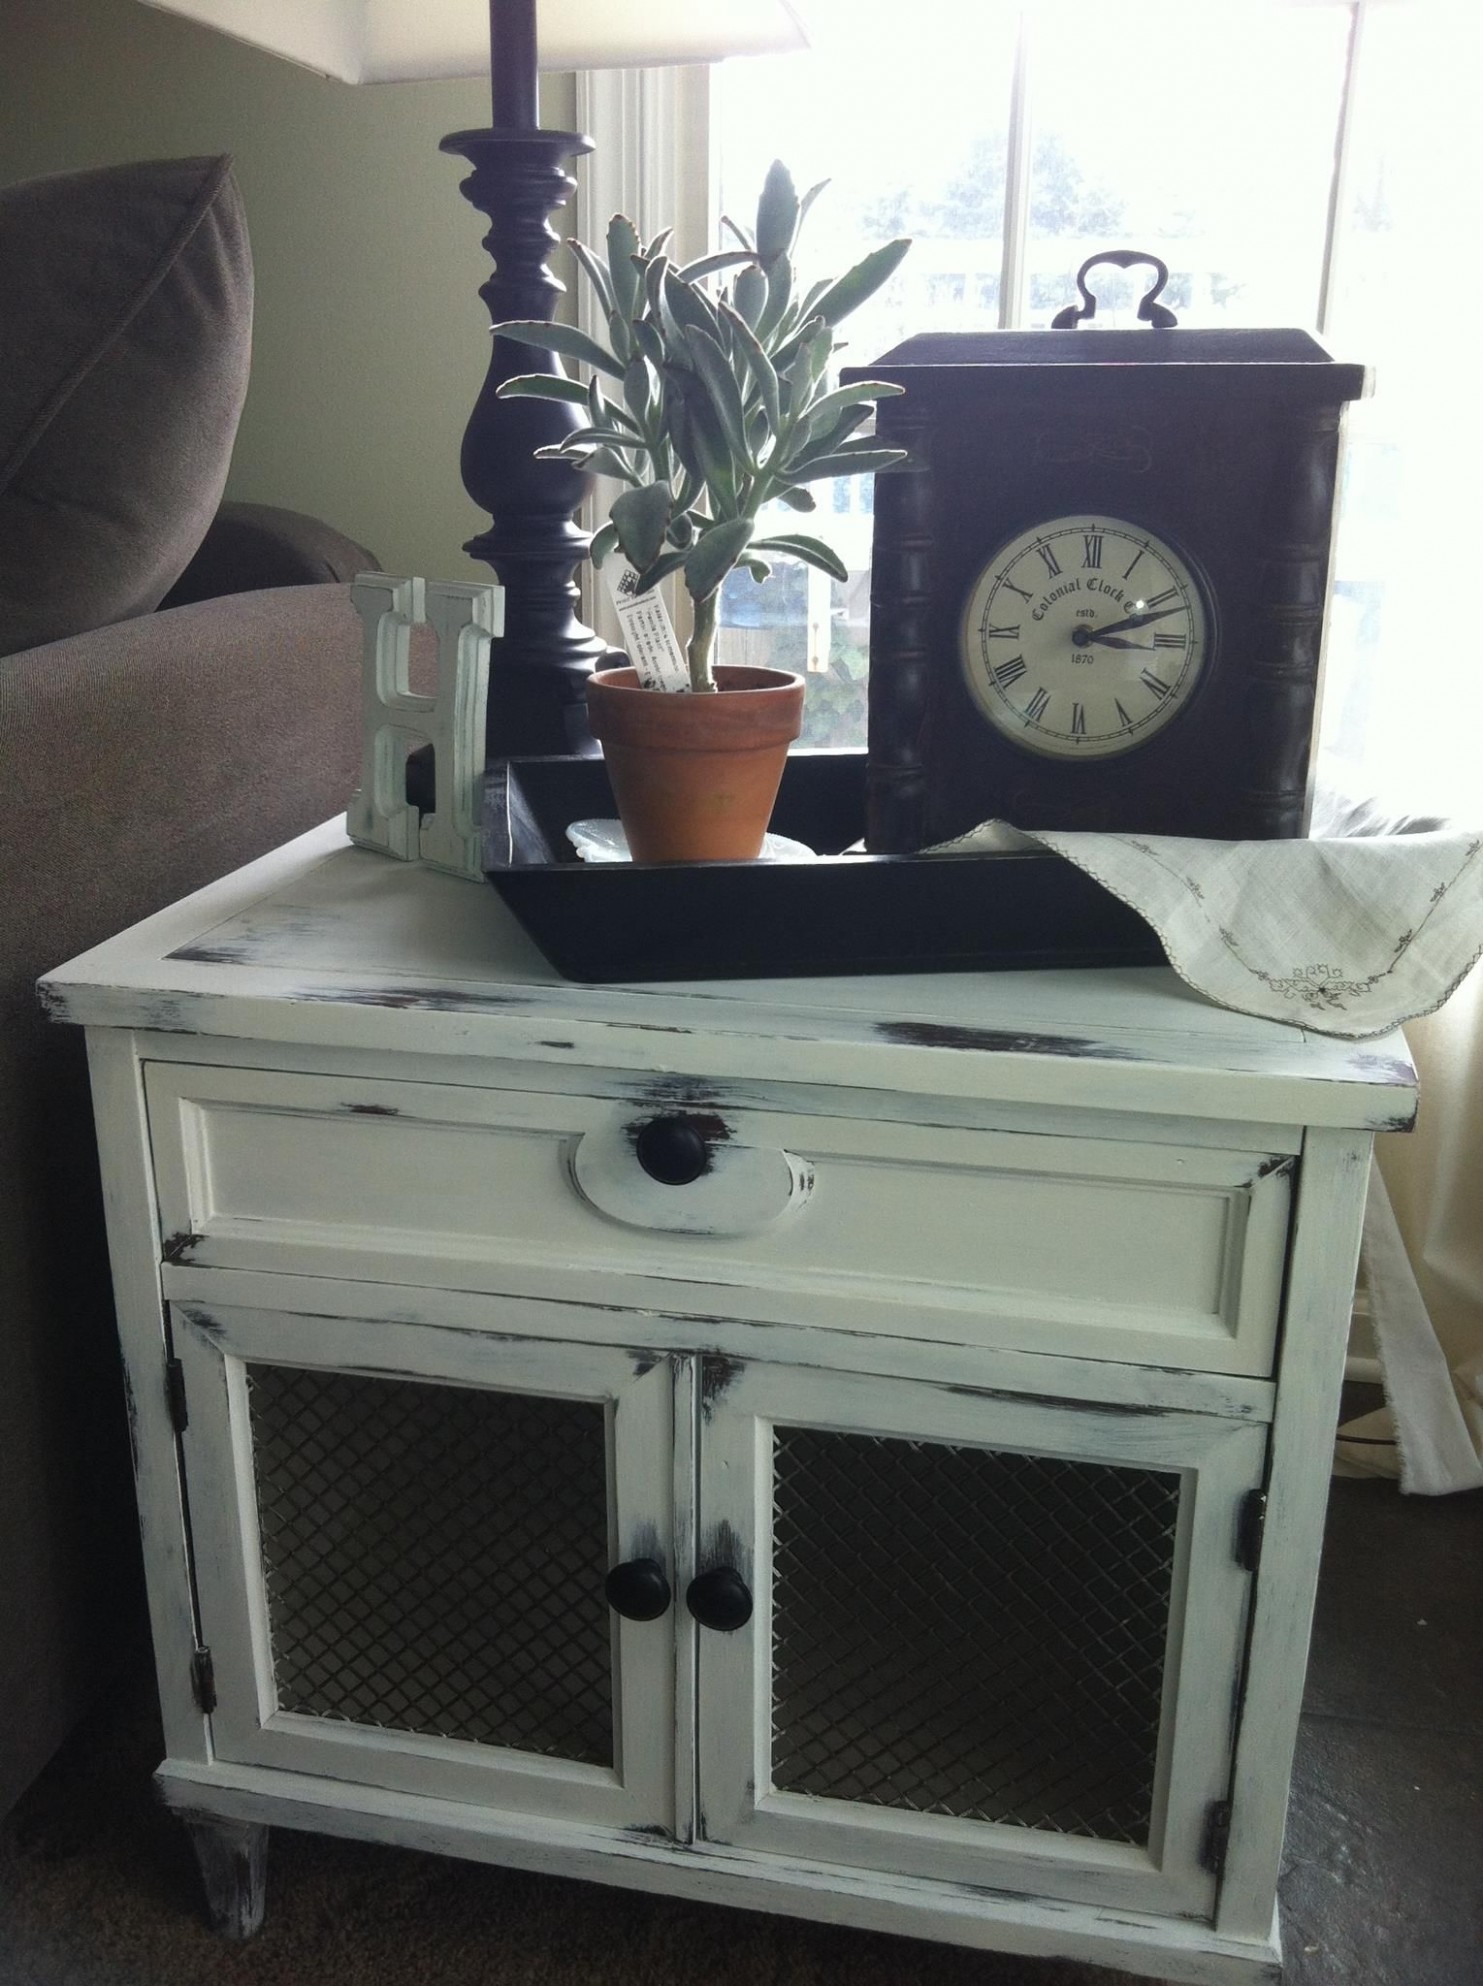 Took An Old Lamp Table And Added Annies Sloan Chalk Paint In Pure White And Then Distressed